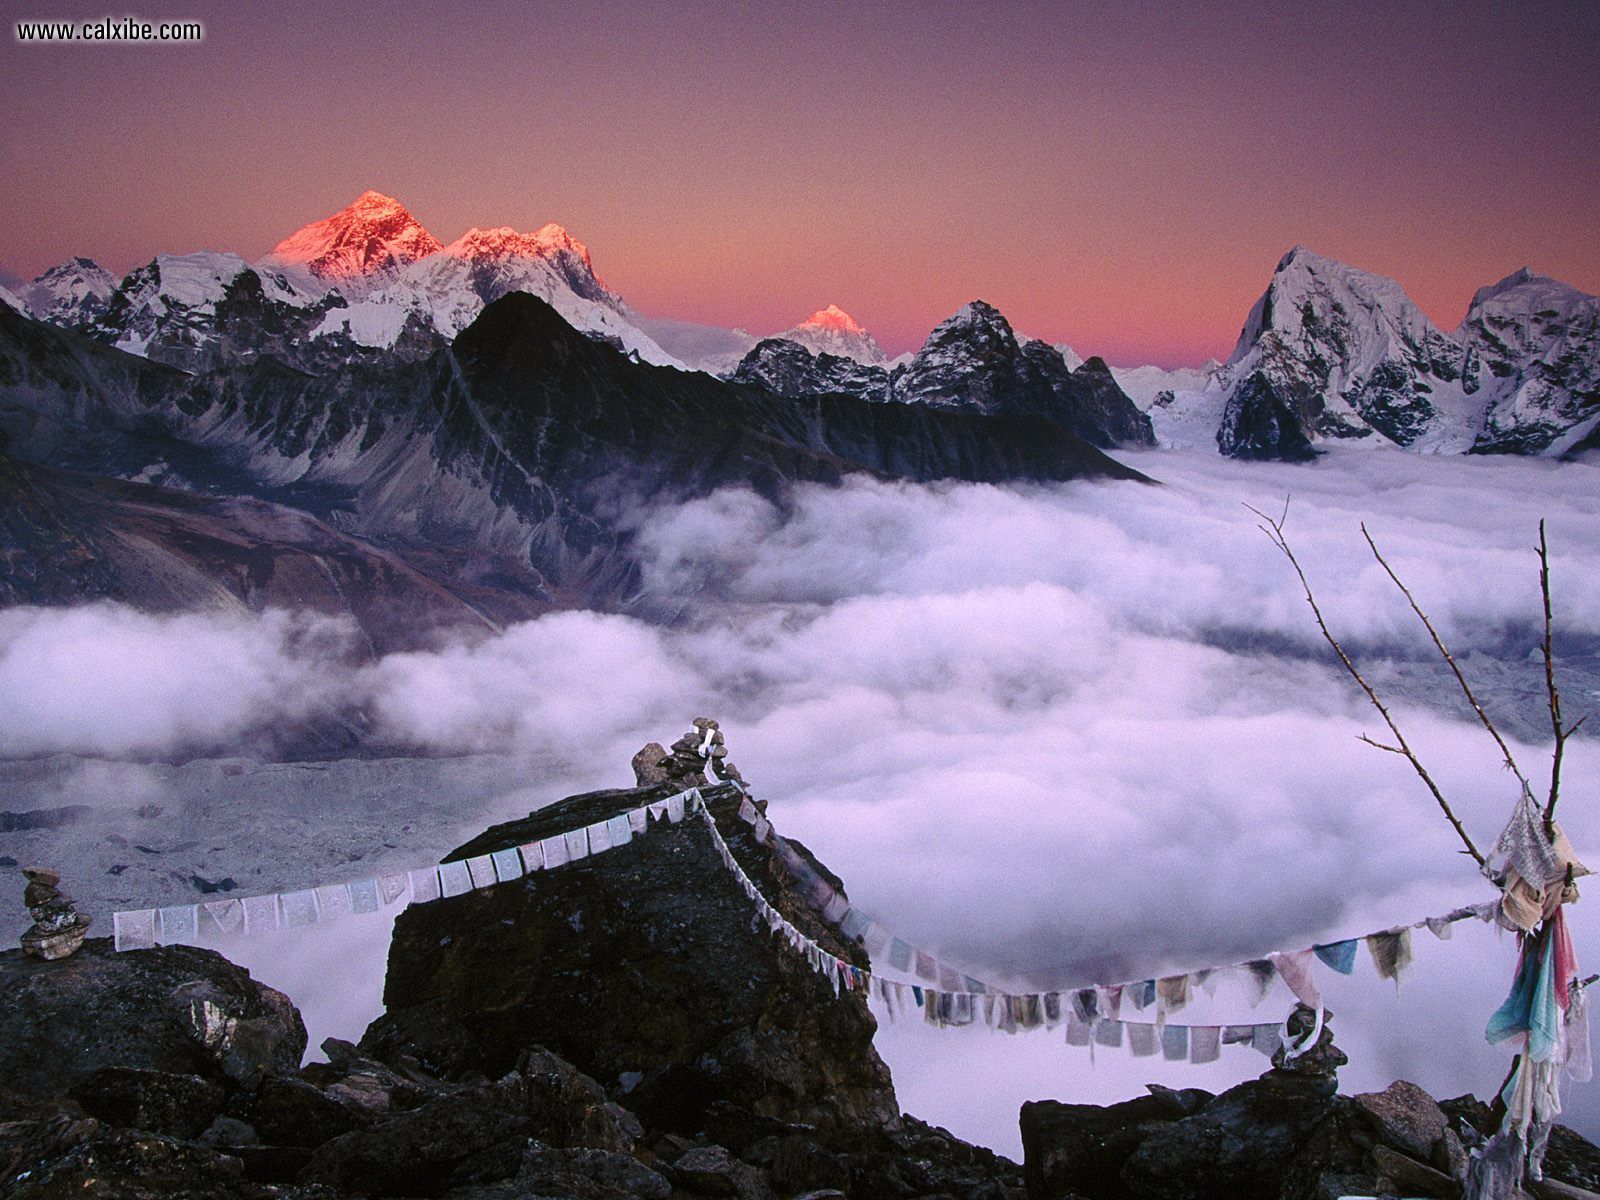 Nature From Everest To Taweche Himalayas Nepal picture nr 16263